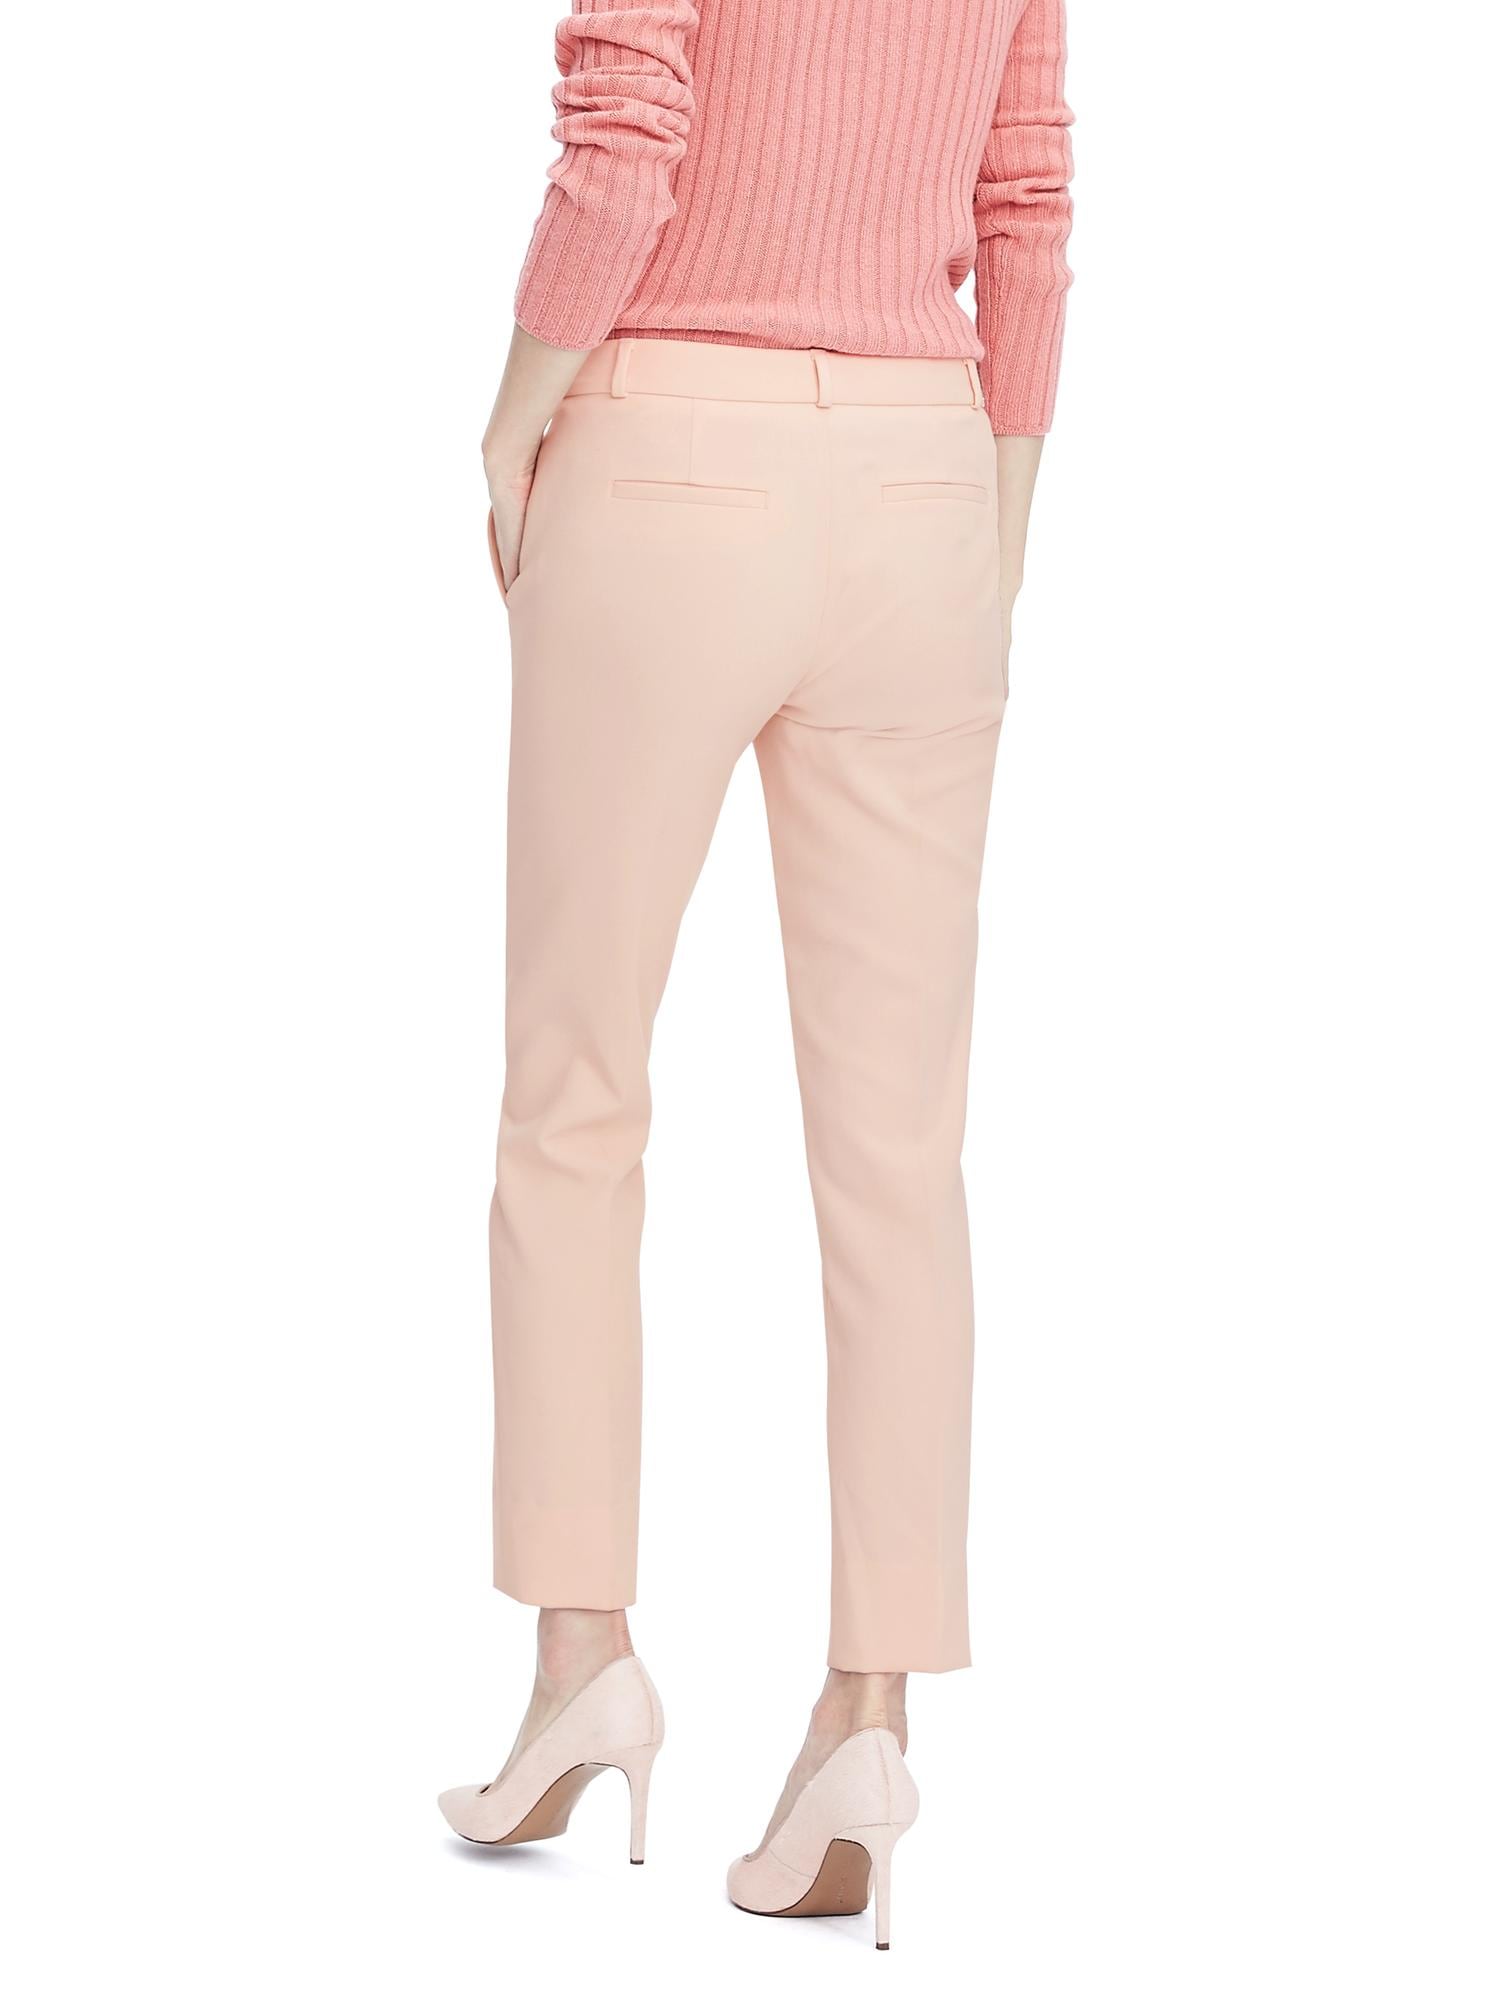 Avery-Fit Tailored Pant